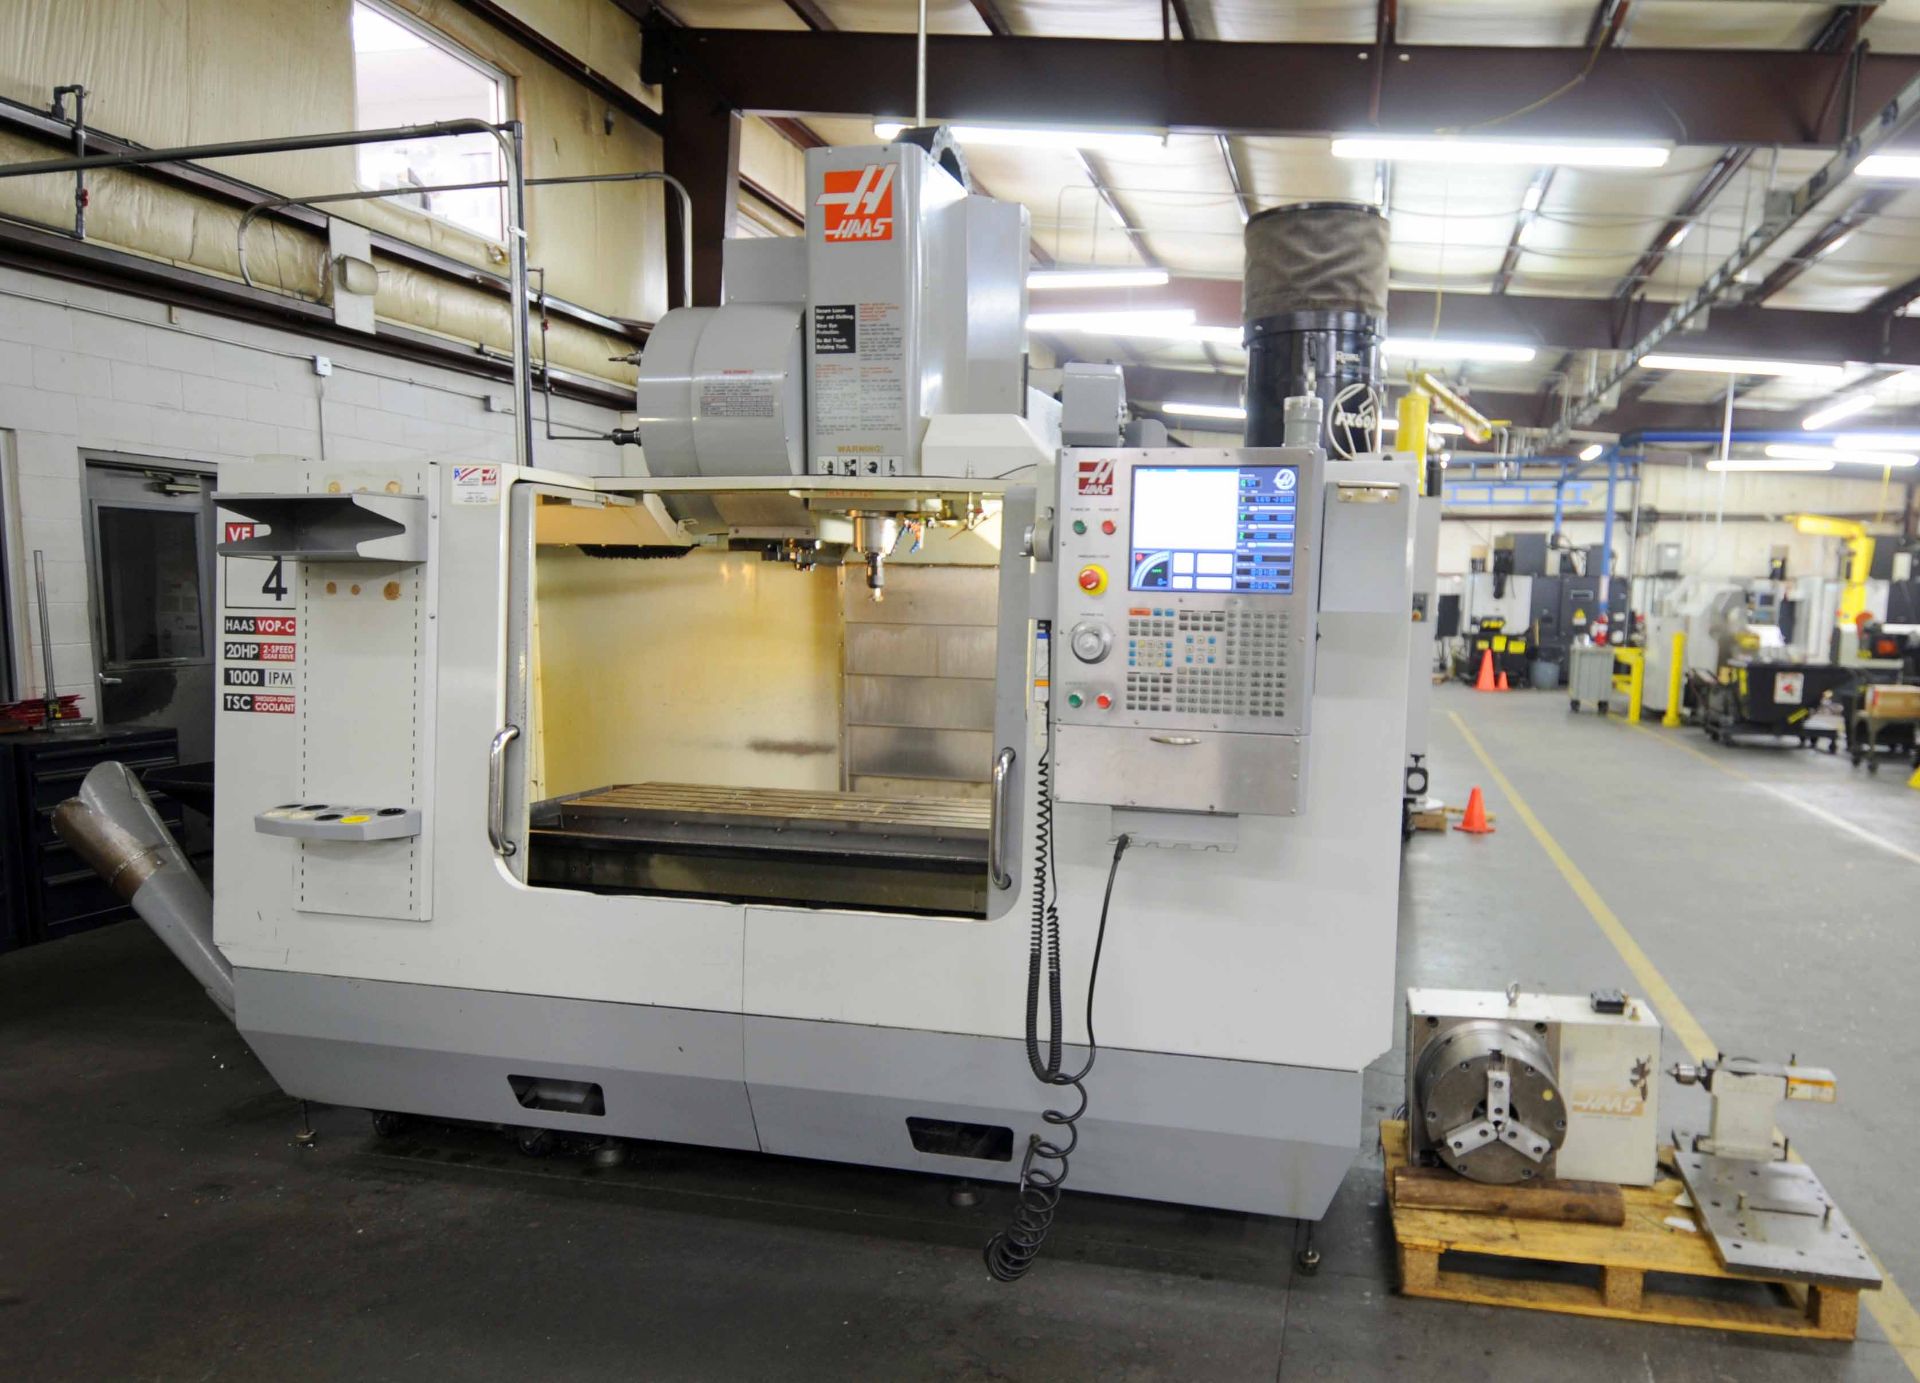 VERTICAL MACHINING CENTER, HAAS MDL. VF-4B 4-AXIS, new 2007, 18” x 52” table, 3,500 lb. table